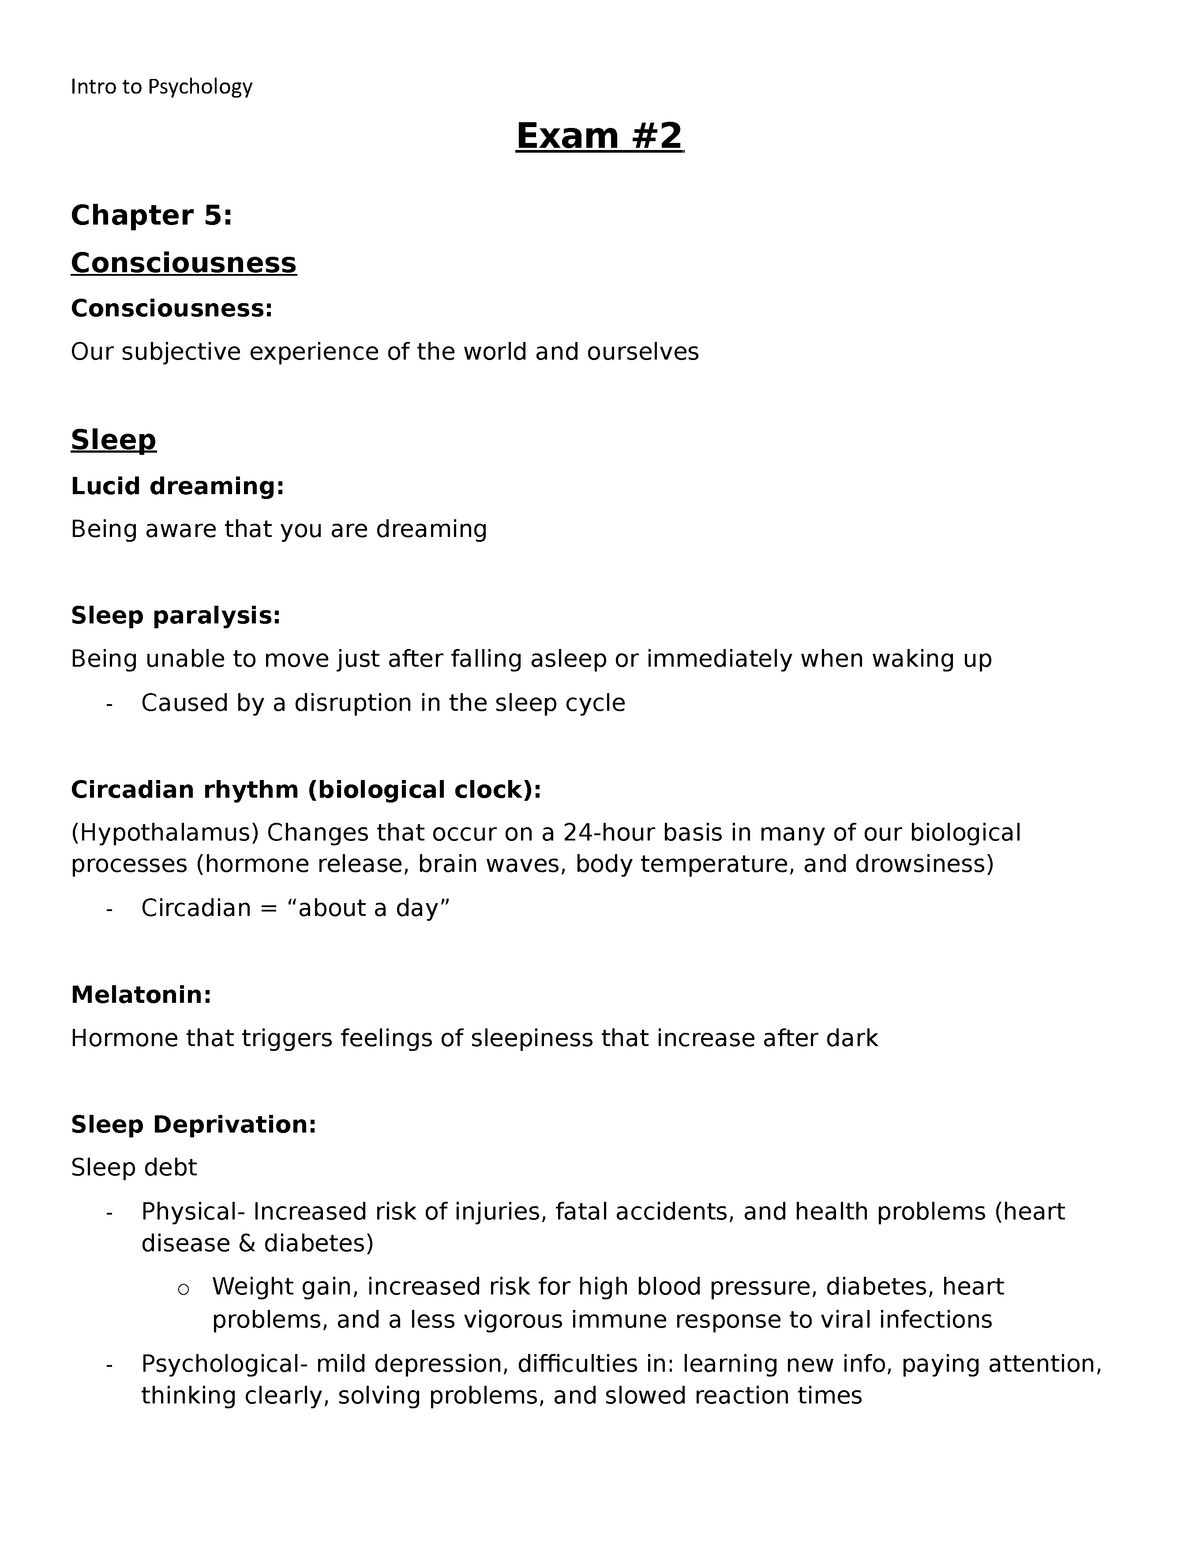 Intro to Psychology PSY 2012 Exam 2 Guide Intro to Psychology Exam